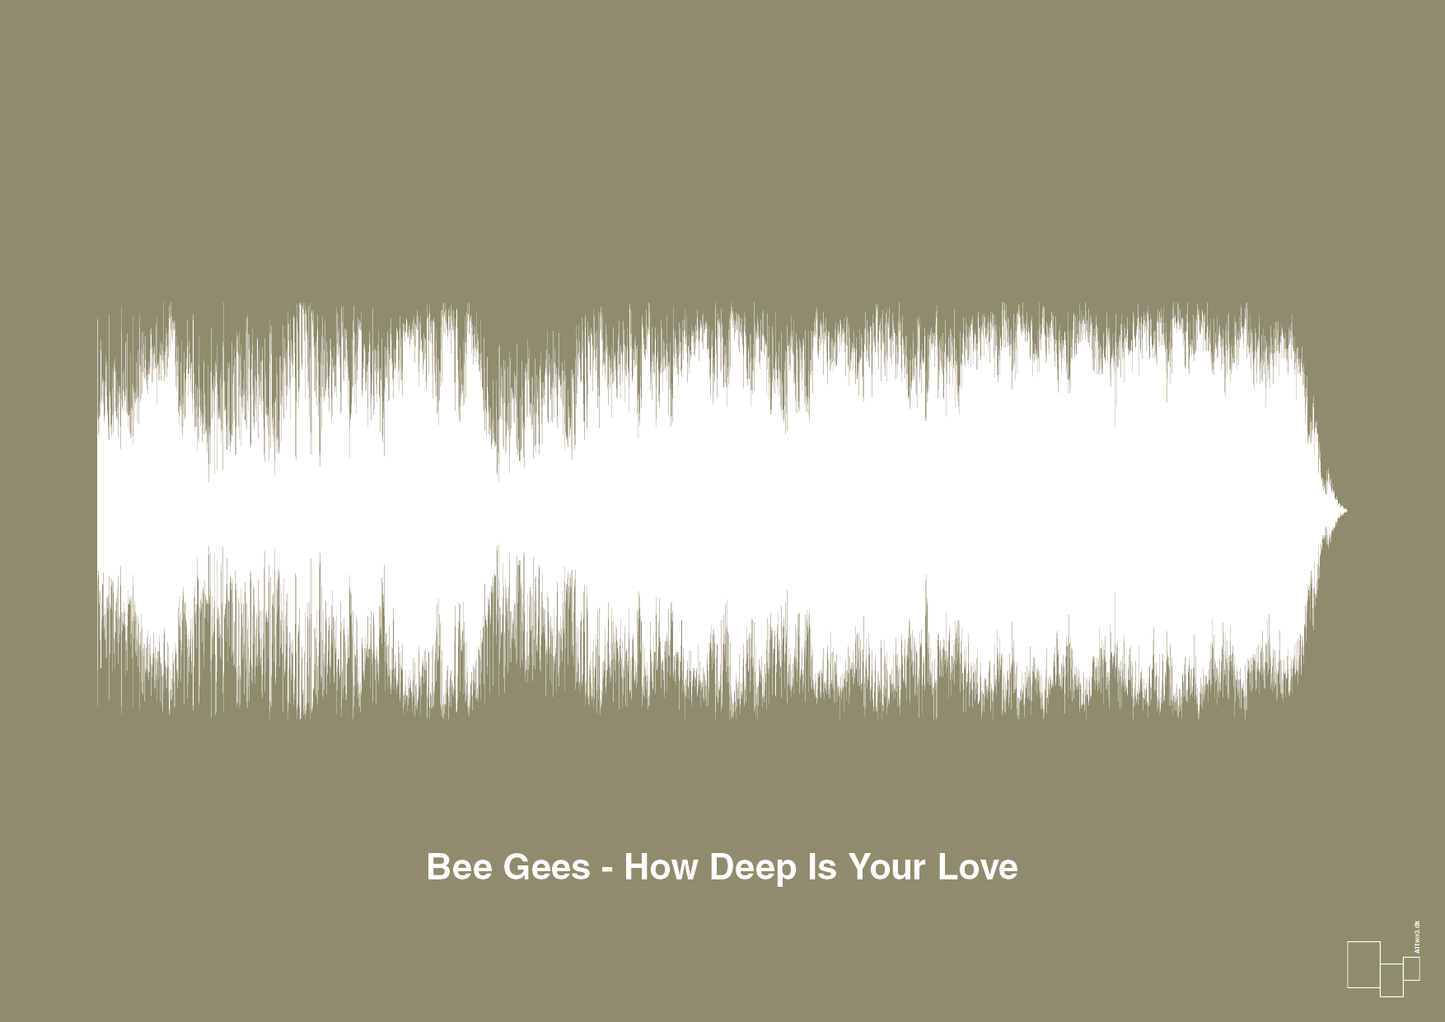 bee gees - how deep is your love - Plakat med Musik i Misty Forrest